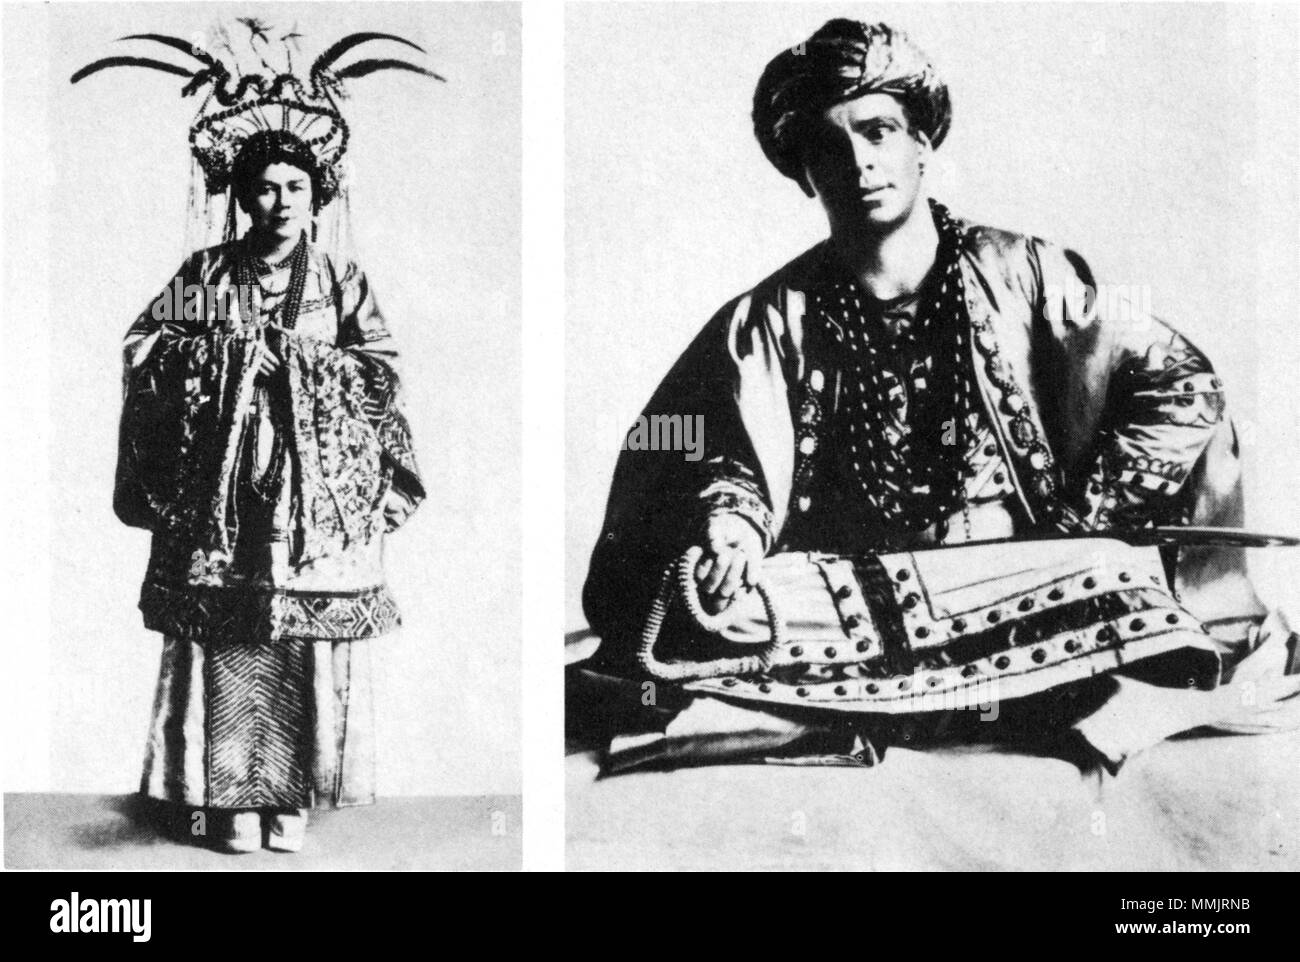 . English: Gertud Eysoldt as Turandot; Alexander Moissi as Calaf. Photos from the program book for Max Reinhardt's 1911 production of Gozzi's Turandot with incidental music by Ferruccio Busoni.  . First published 1911.. Unknown 81 Berlin 1911 - Eysoldt &amp; Moissi Stock Photo